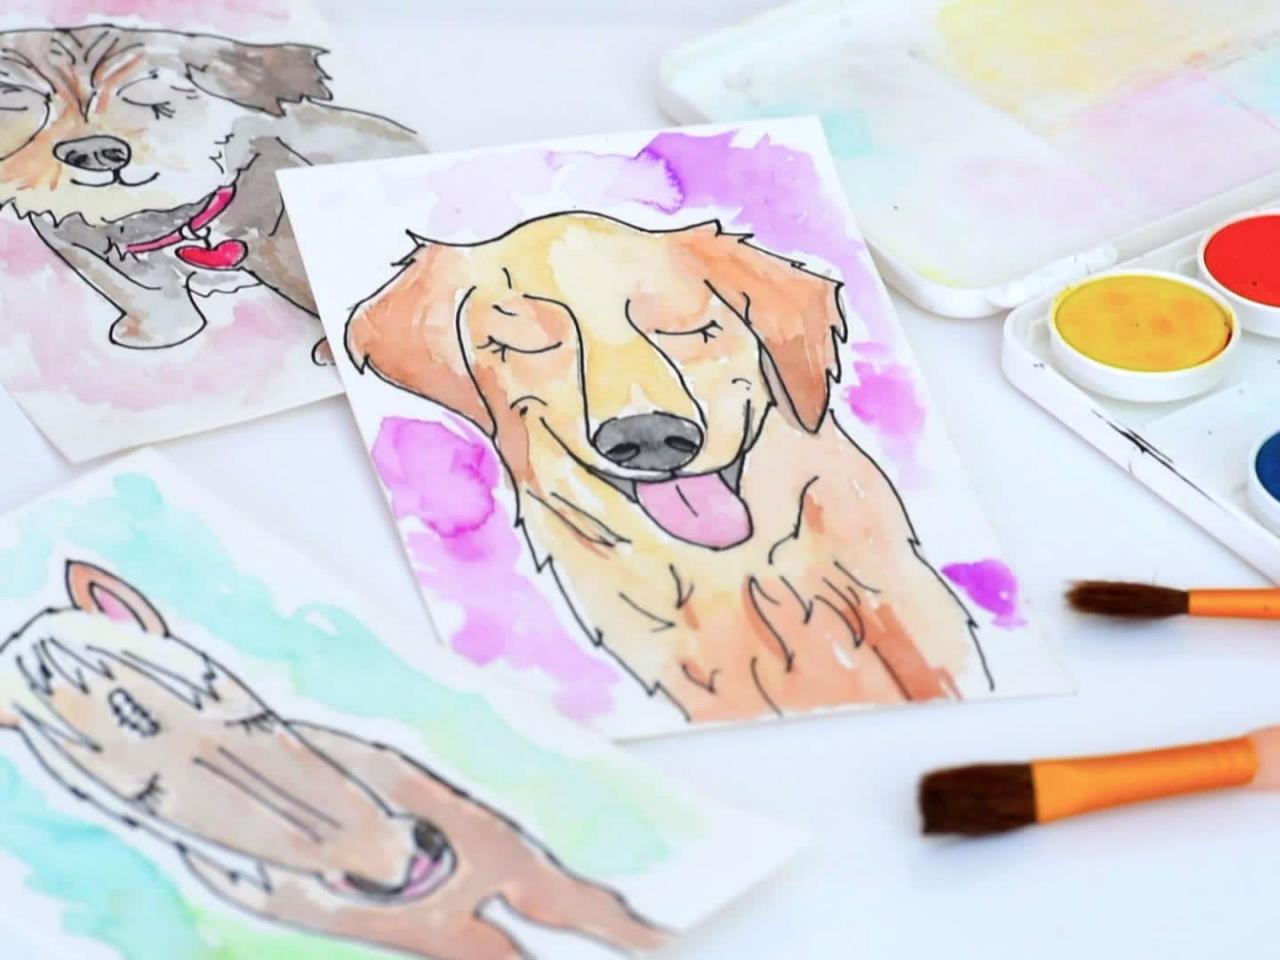 Watercolor Painting Images - Free Download on Freepik